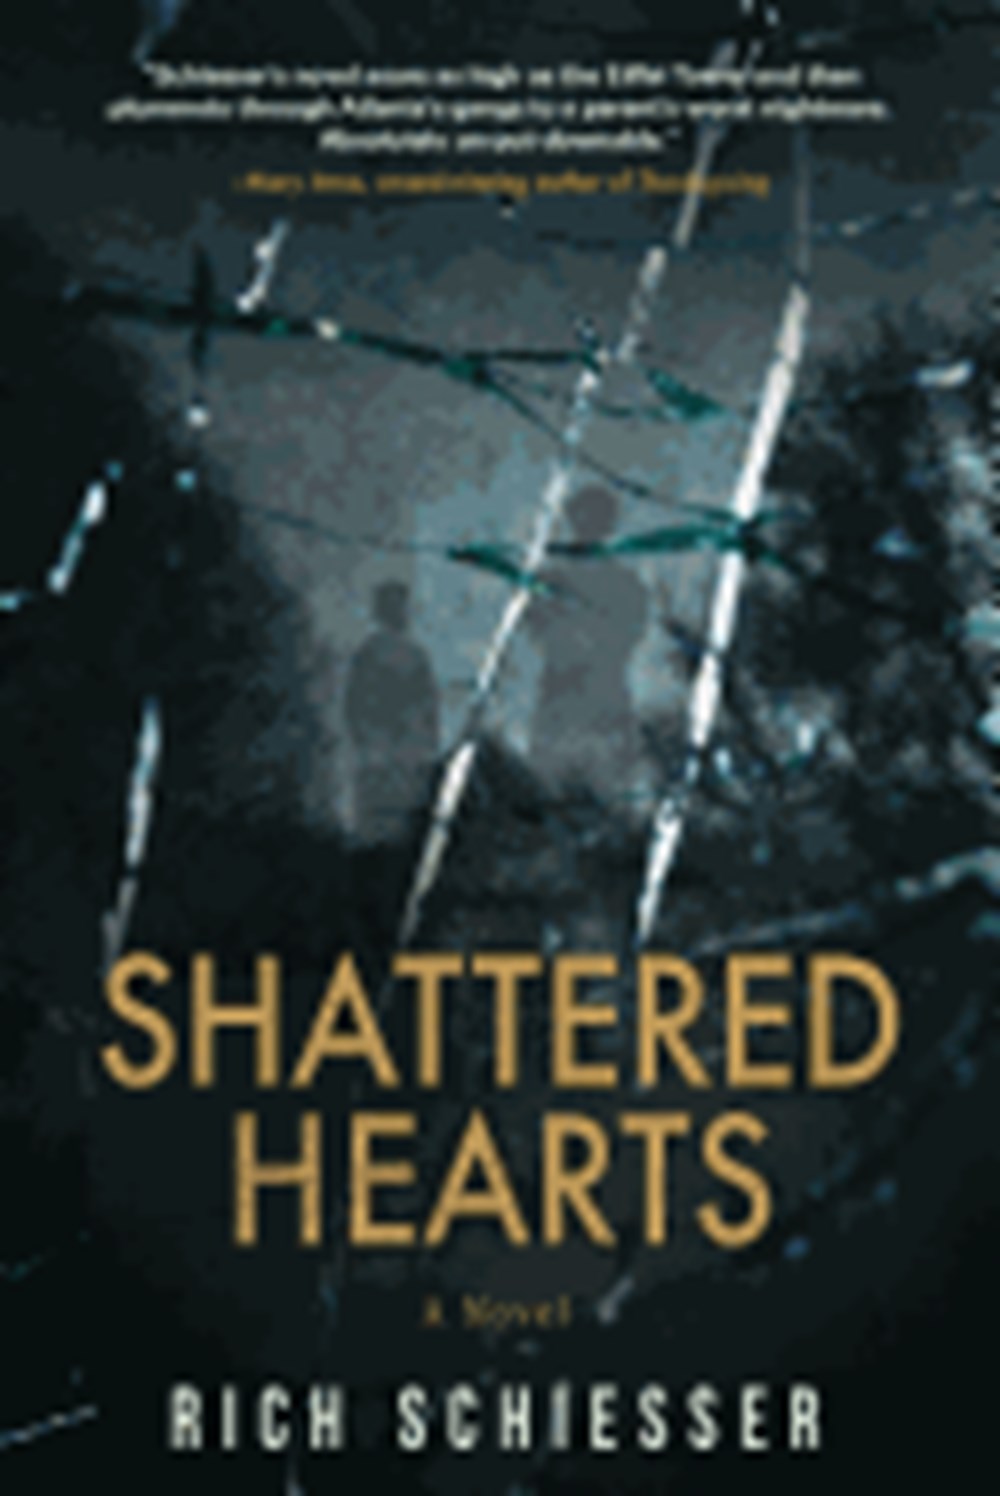 Shattered Hearts